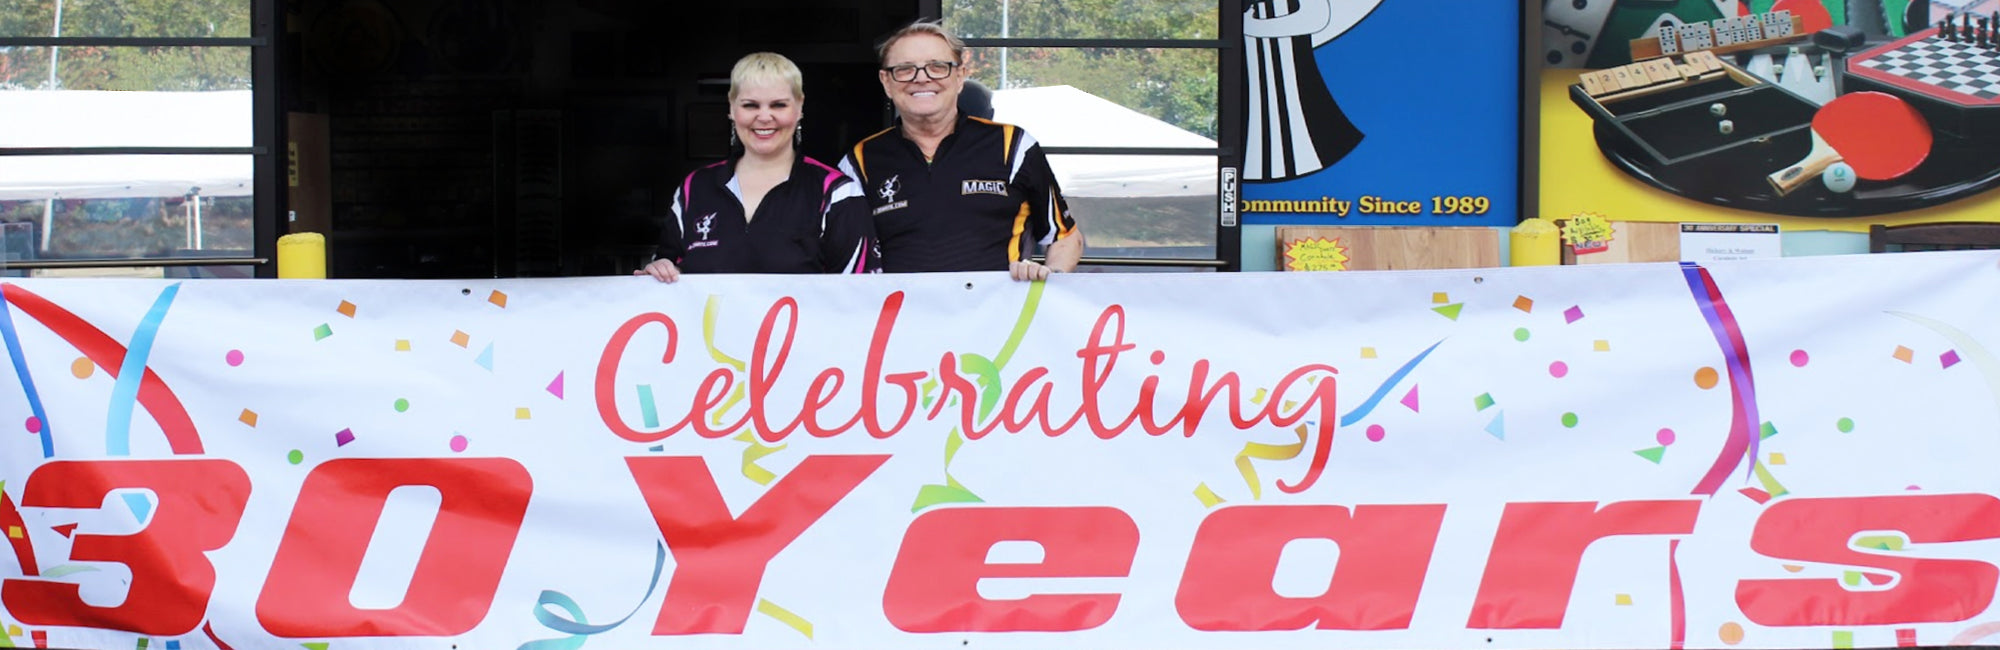 A-Z Darts Celebrates 30 Years with owners John and Kelly Baxter | A-Z Darts